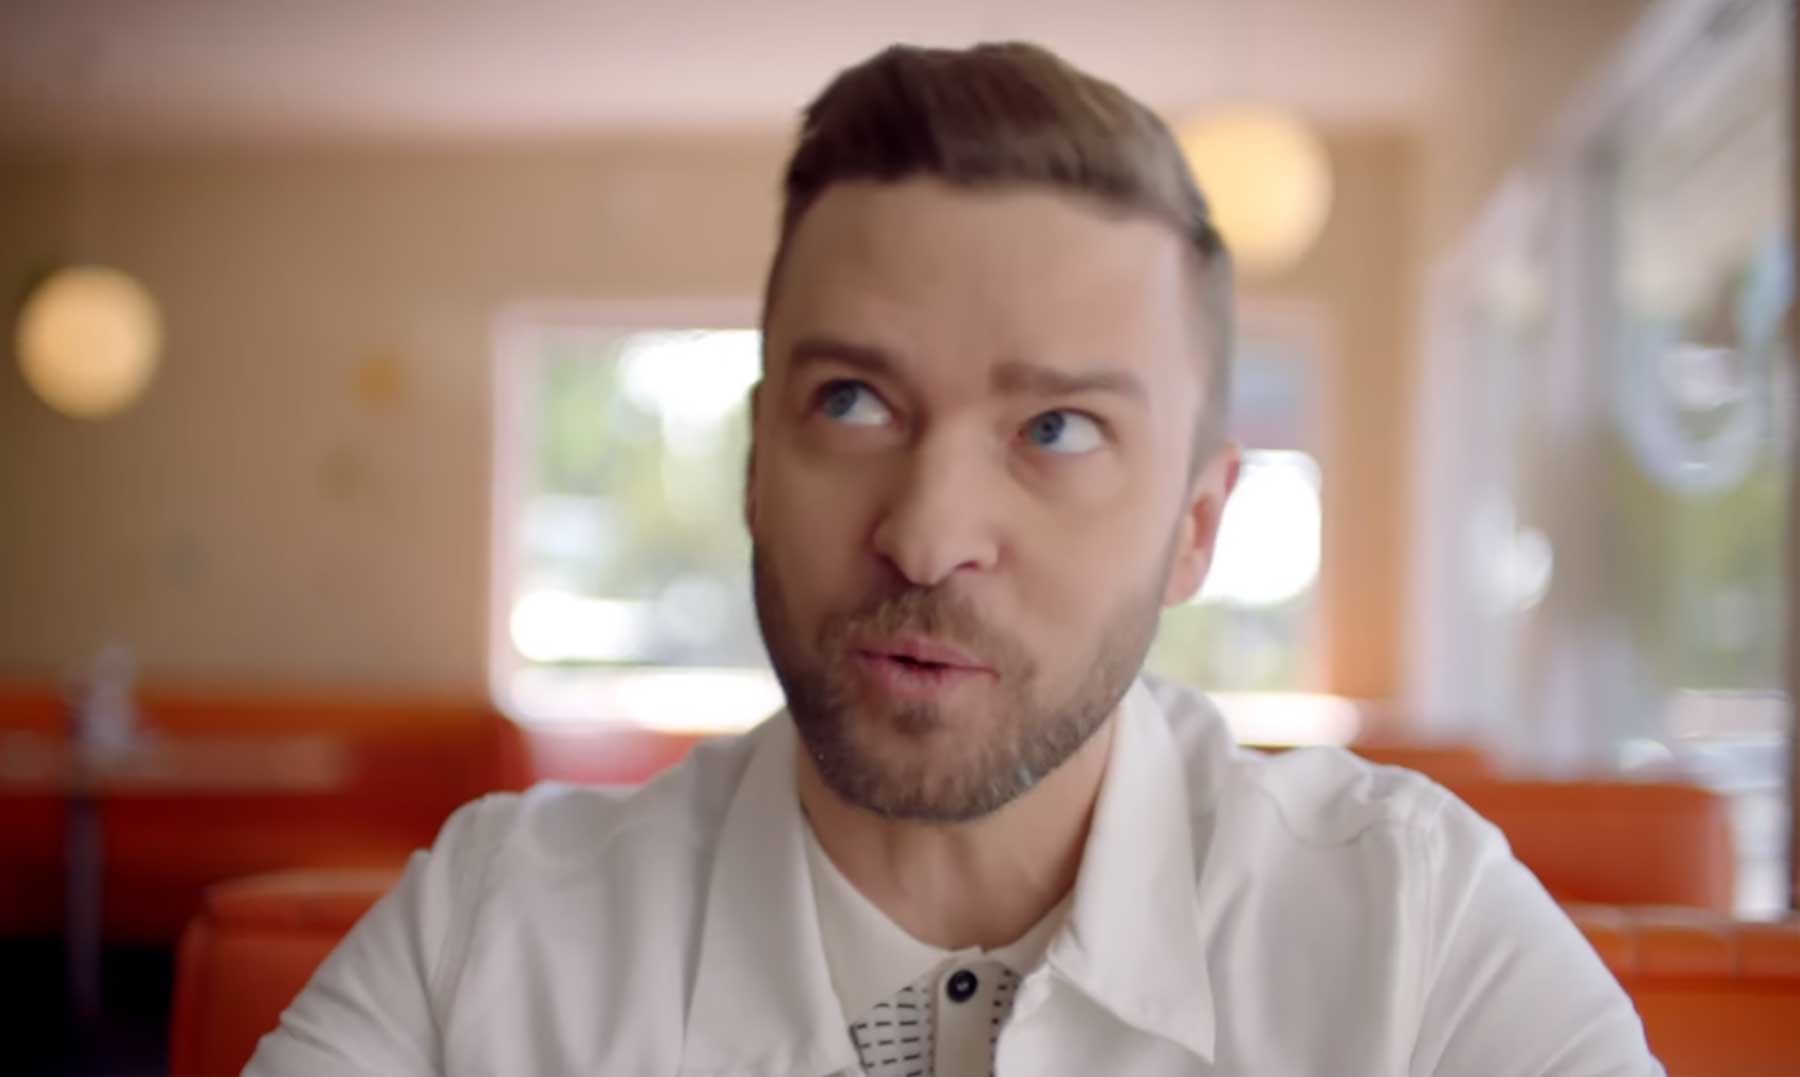 Musicless Video: Can't Stop The Feeling cant-stop-the-feeling-justin-timberlake-musikloses-video 